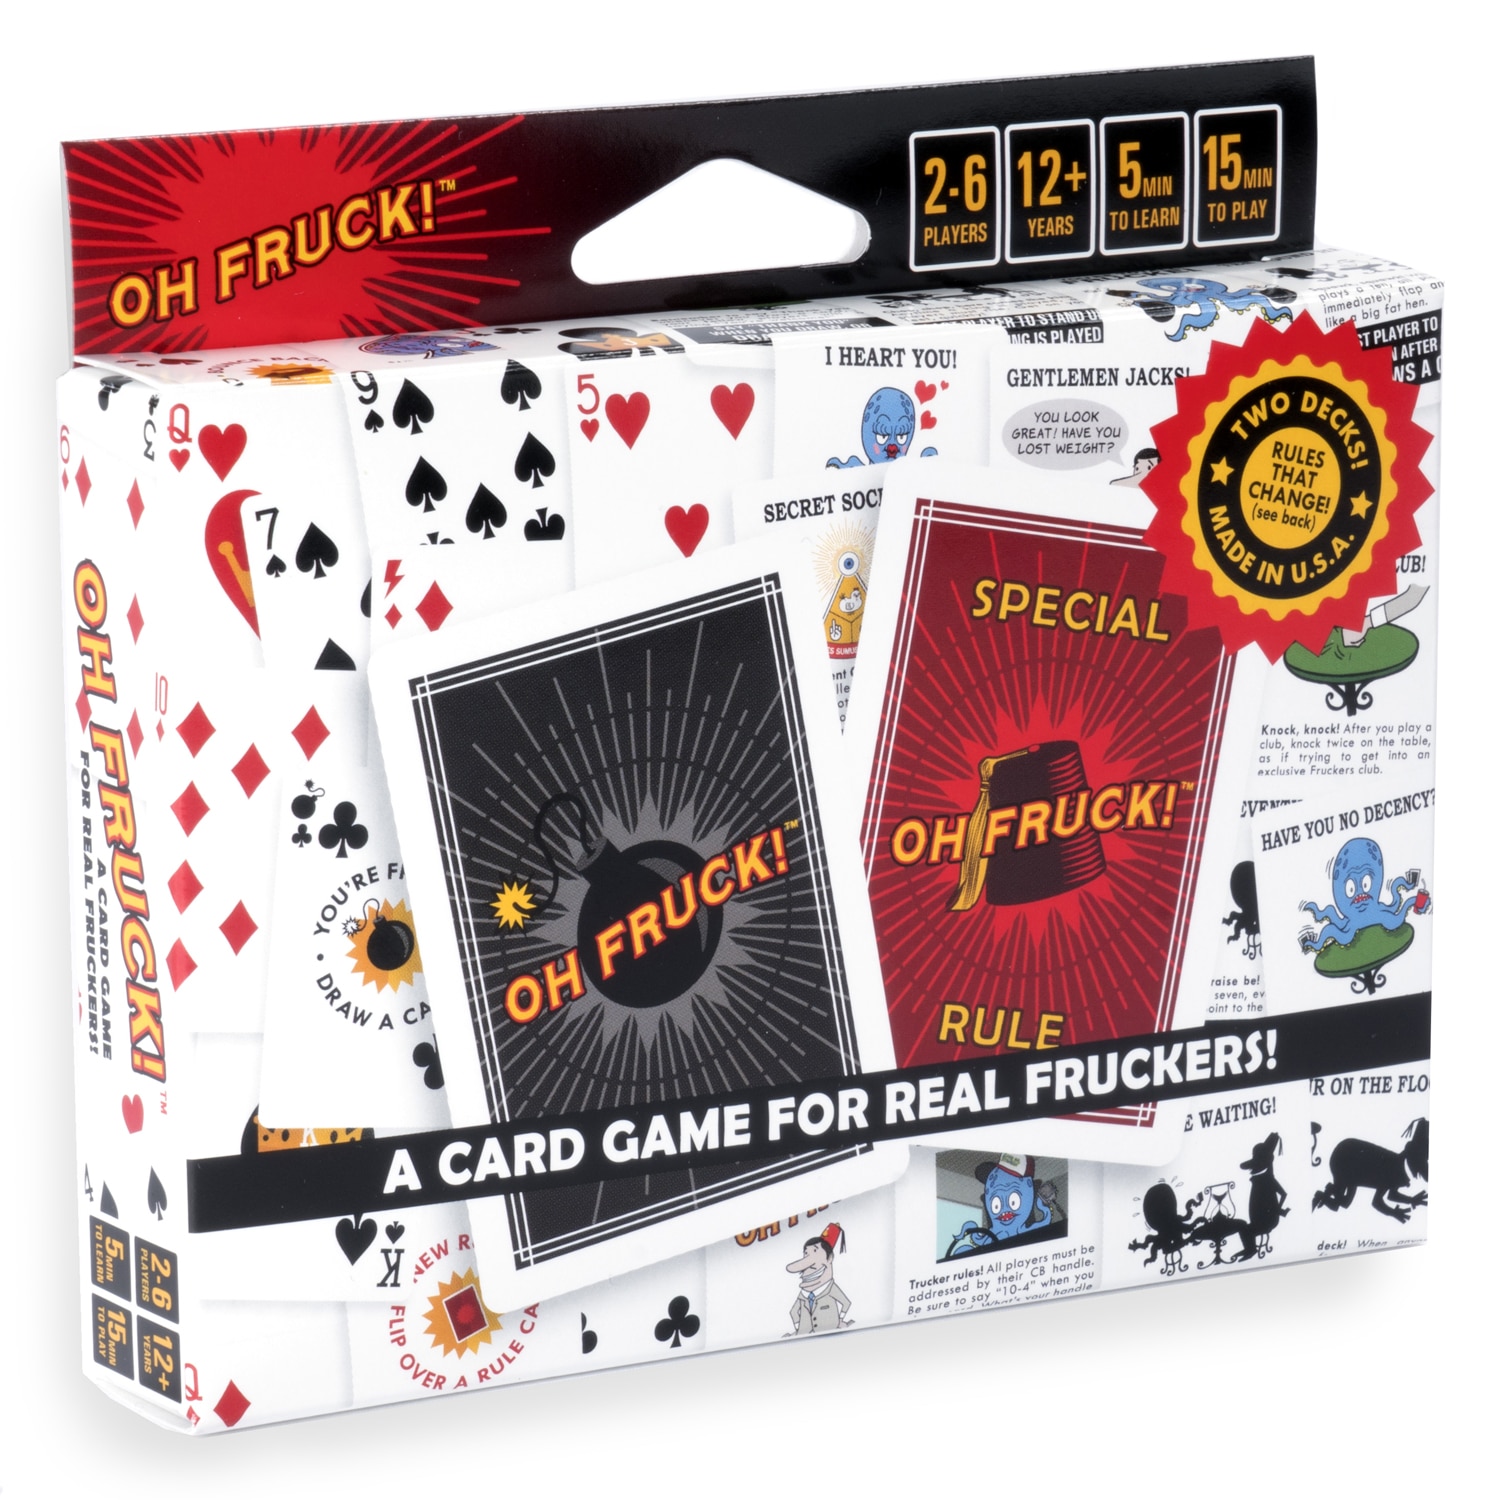 Oh Fruck! Card Game